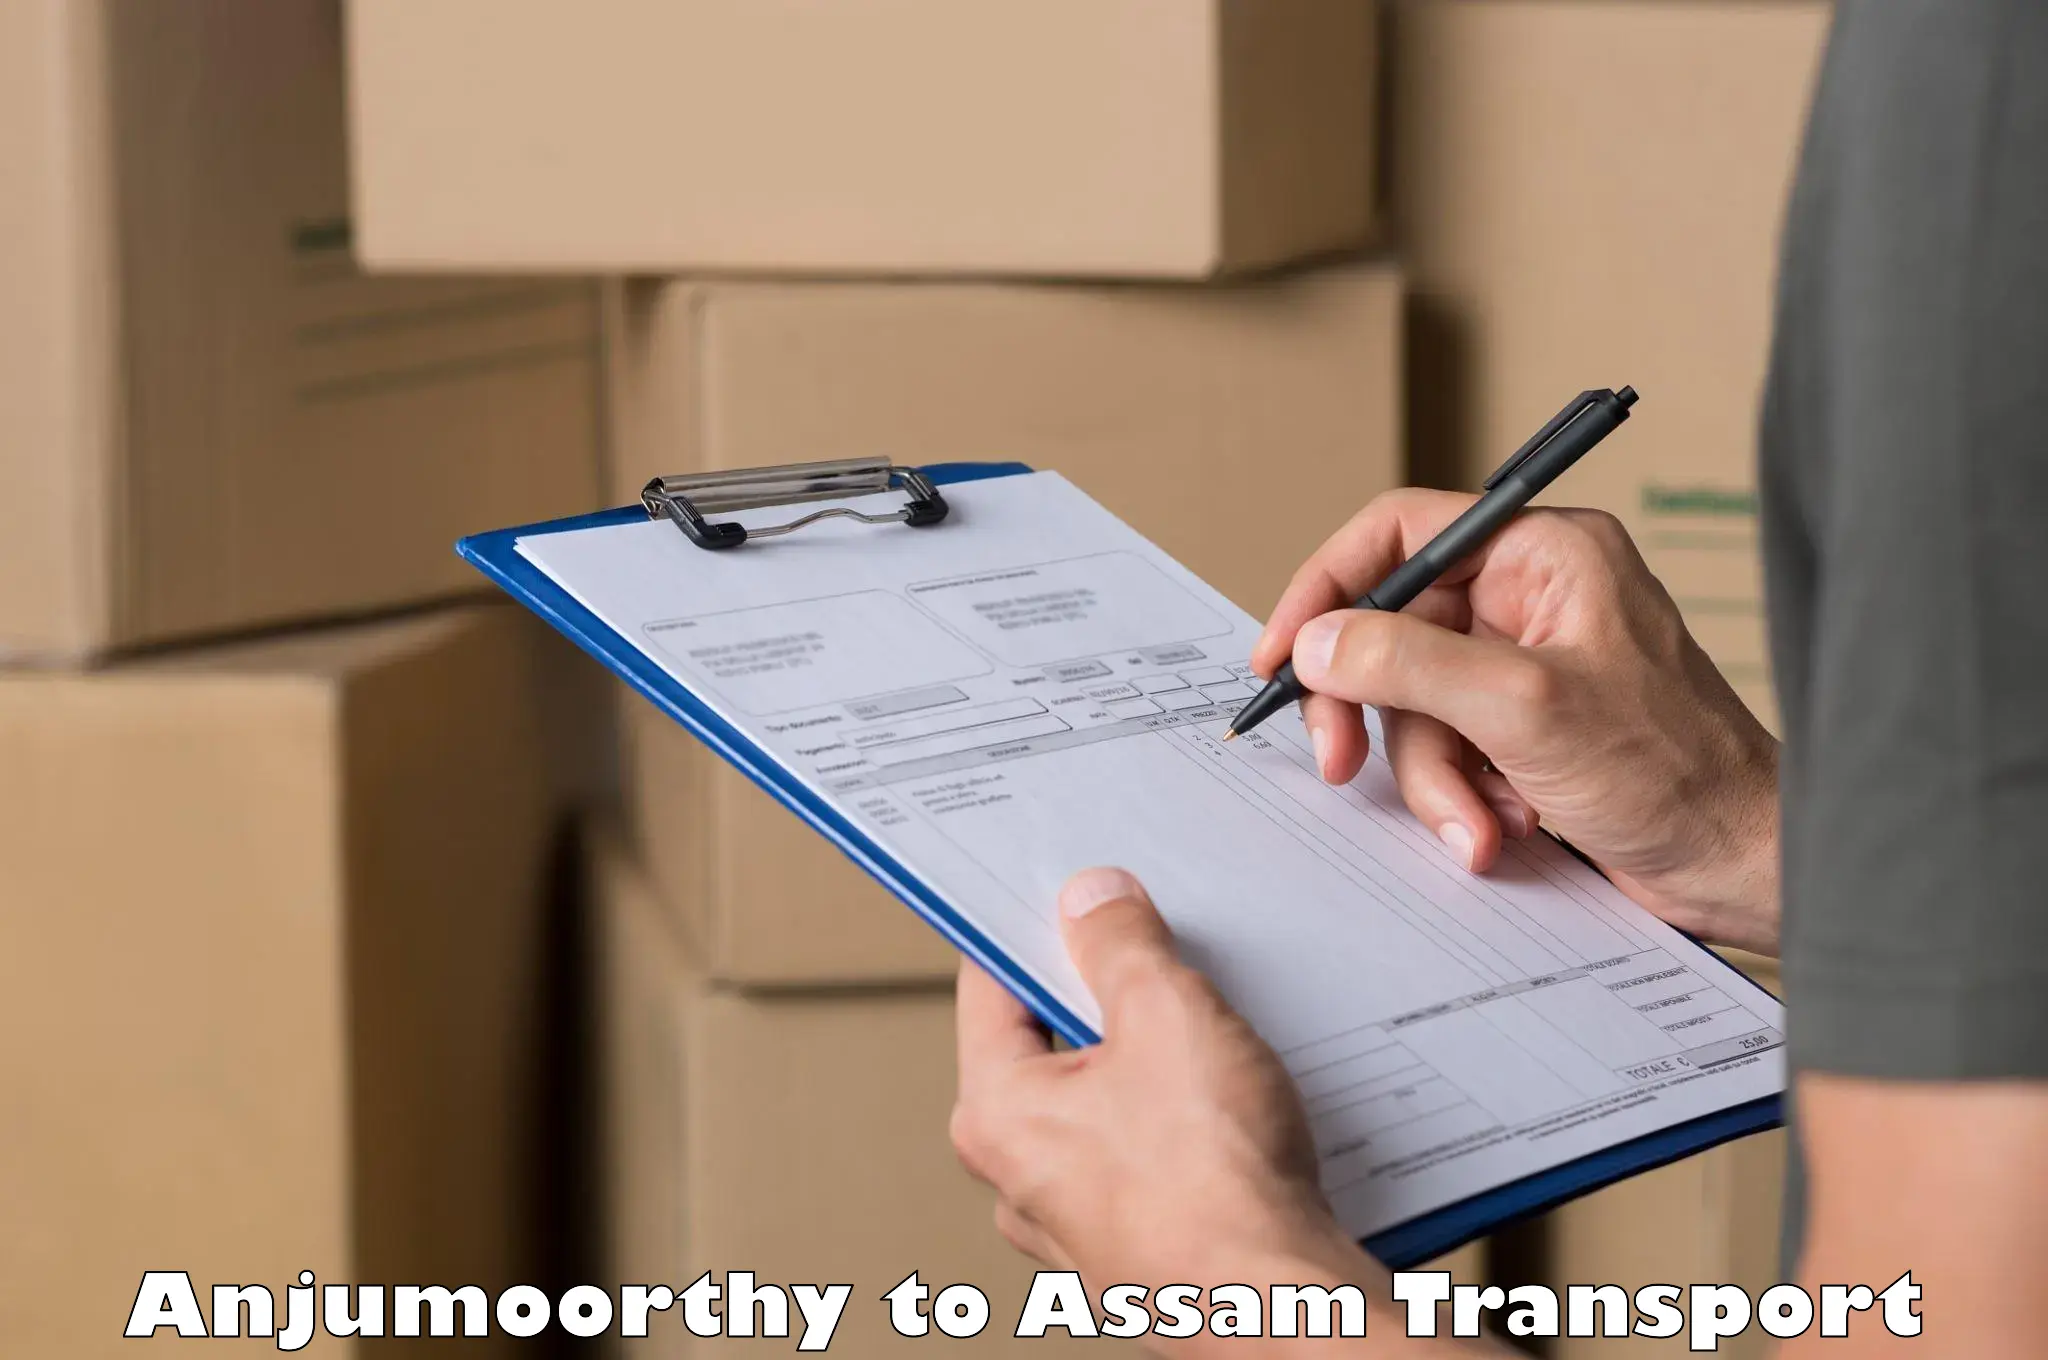 Express transport services Anjumoorthy to Assam